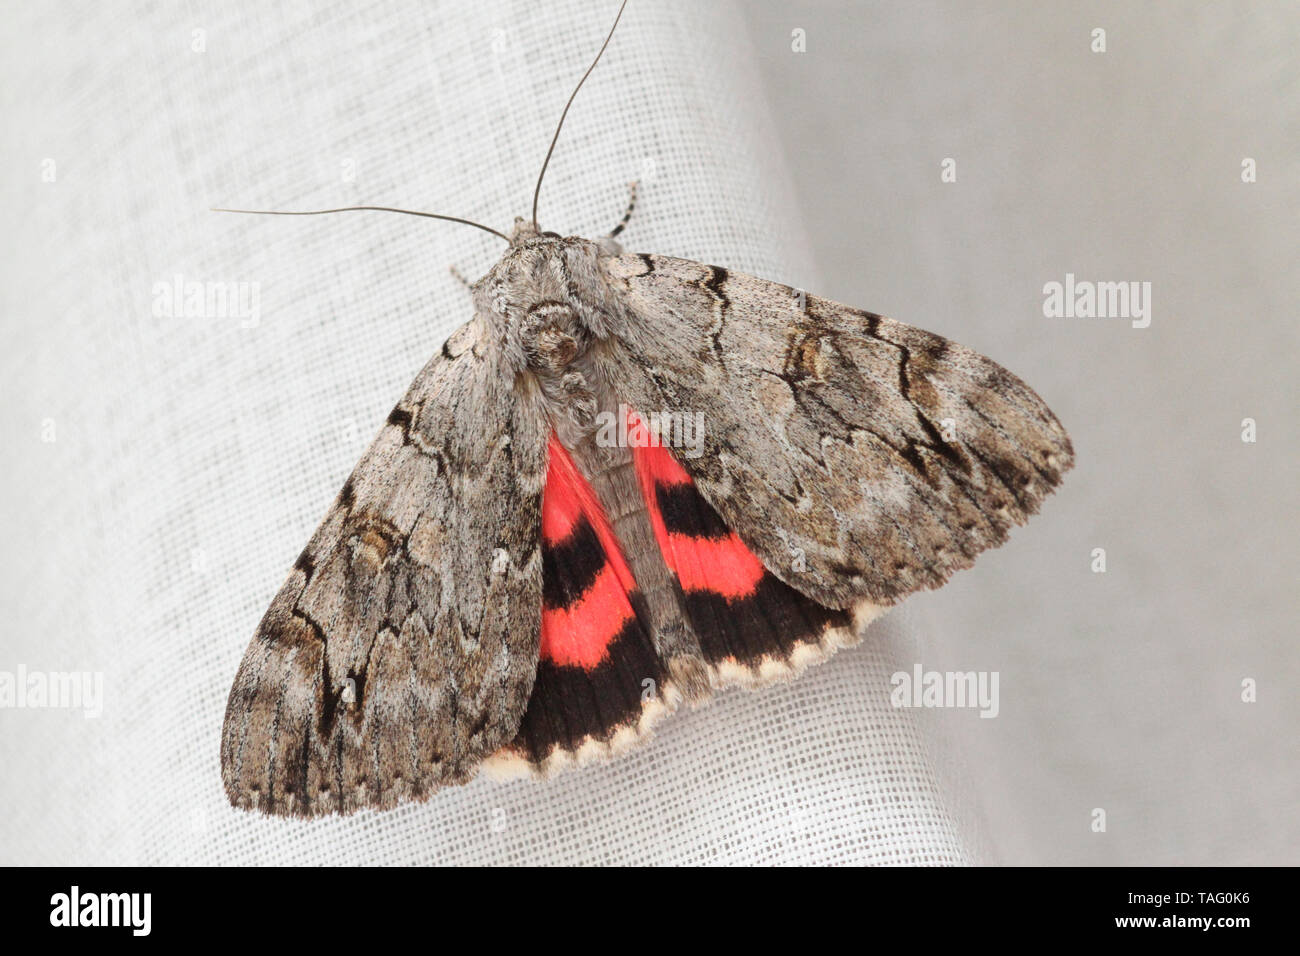 Underwing moth (Catocala sp) posed on a white cloth, Brittany, France Stock Photo